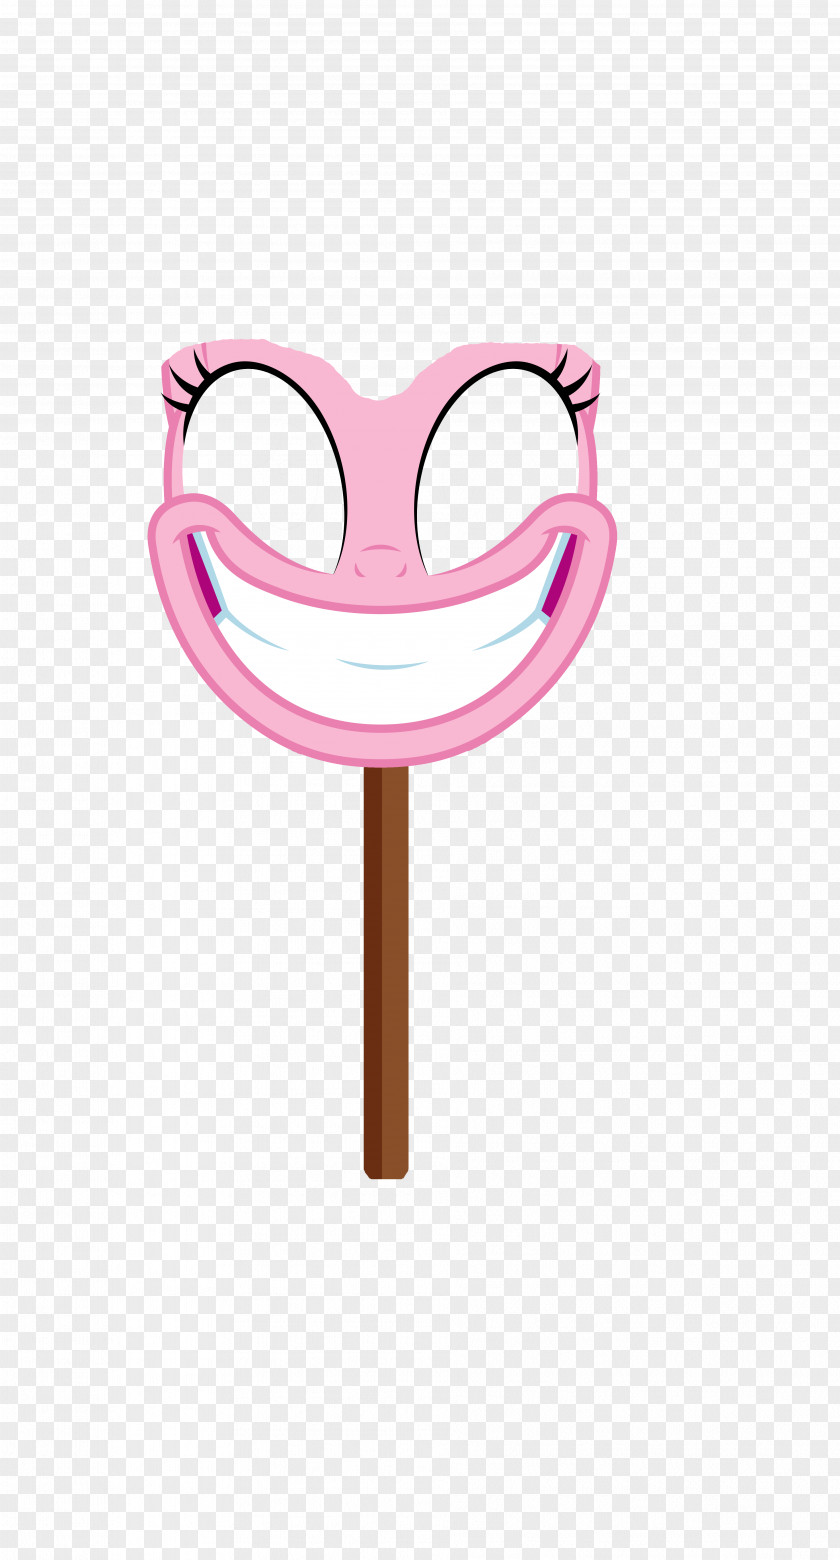 Smile Laughter Happiness Glasses Art PNG